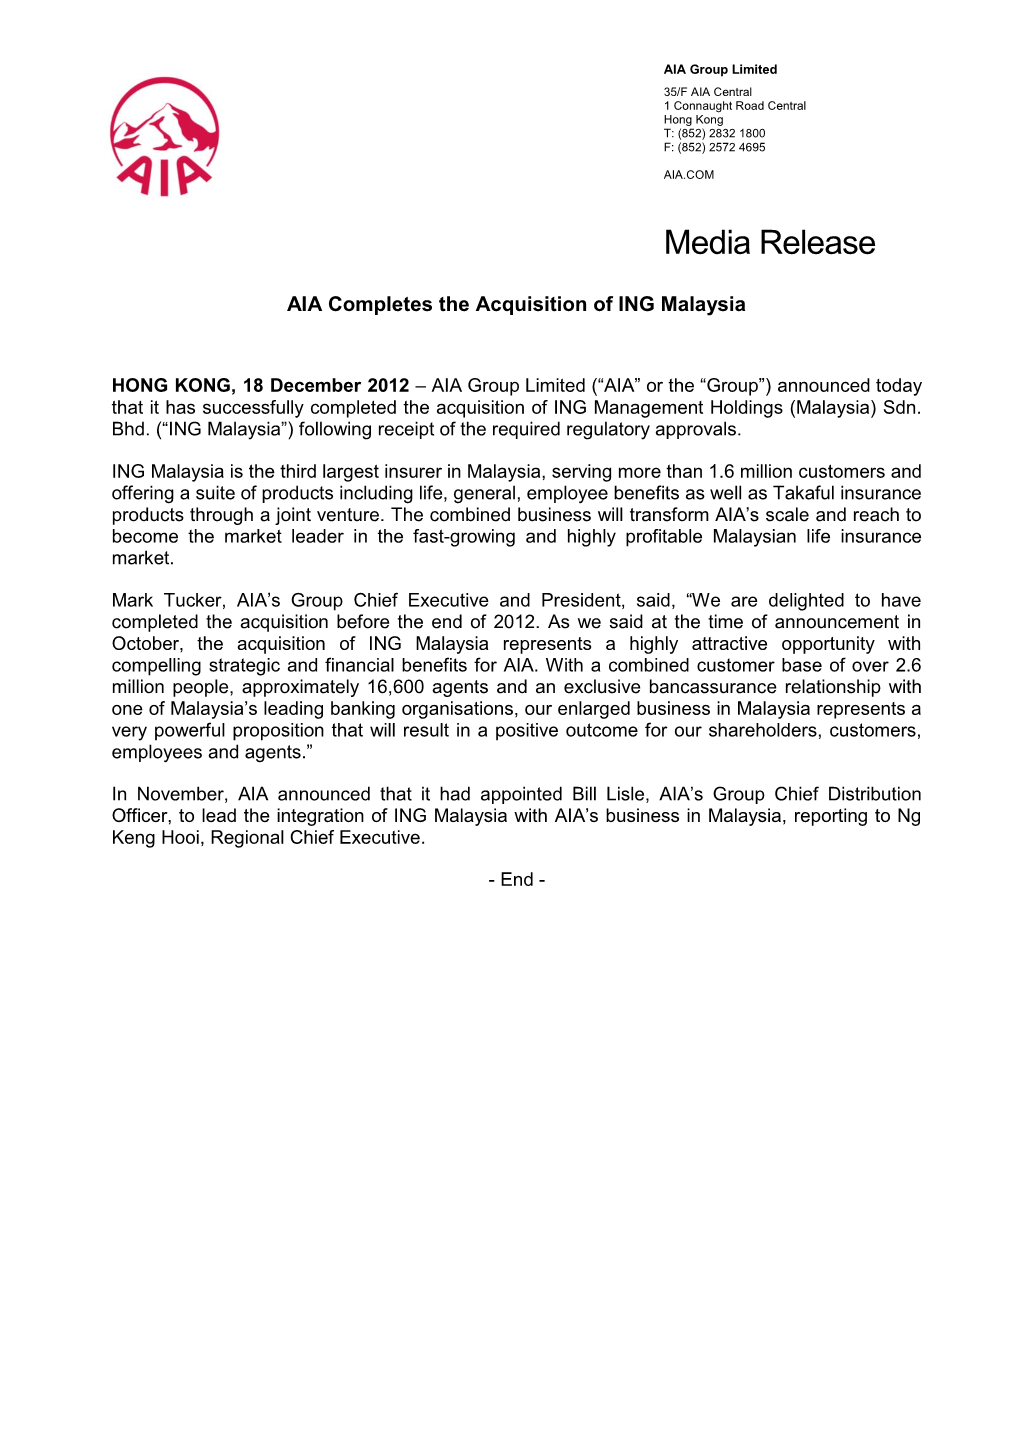 AIA Completes the Acquisition of ING Malaysia 18 December 2012